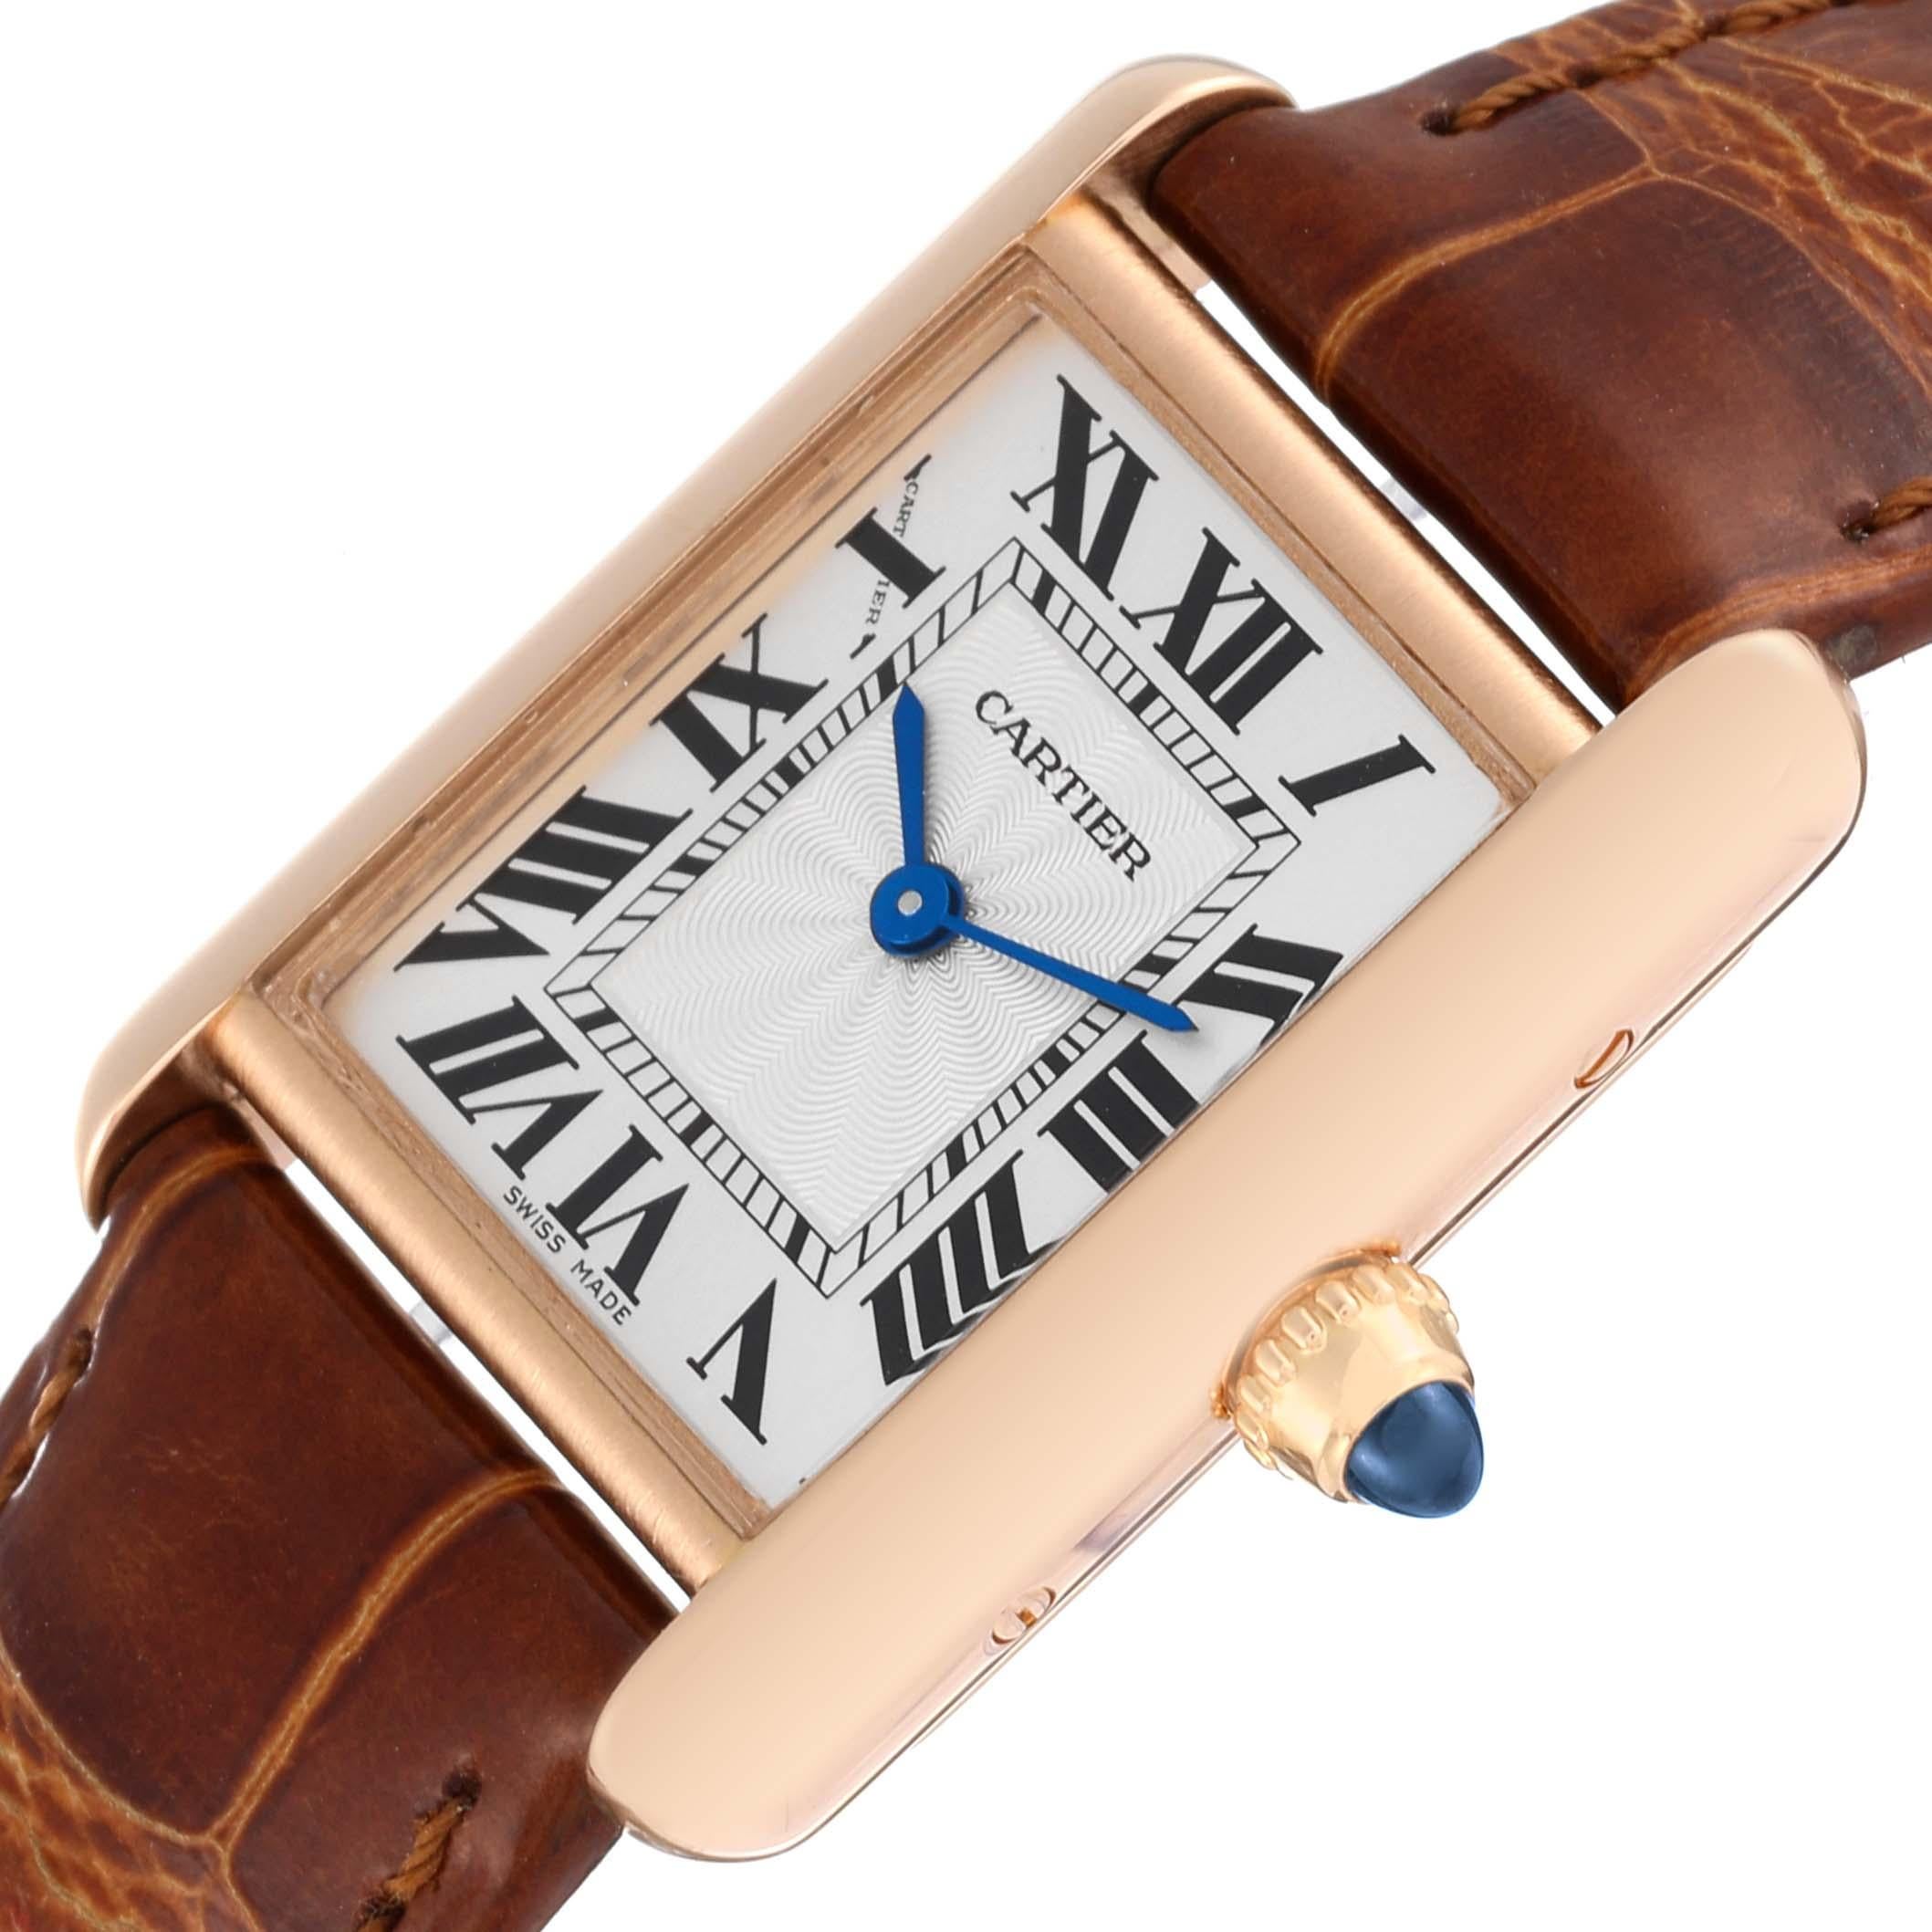 Cartier Tank Louis Rose Gold Mechanical Ladies Watch WGTA0010 Papers 1